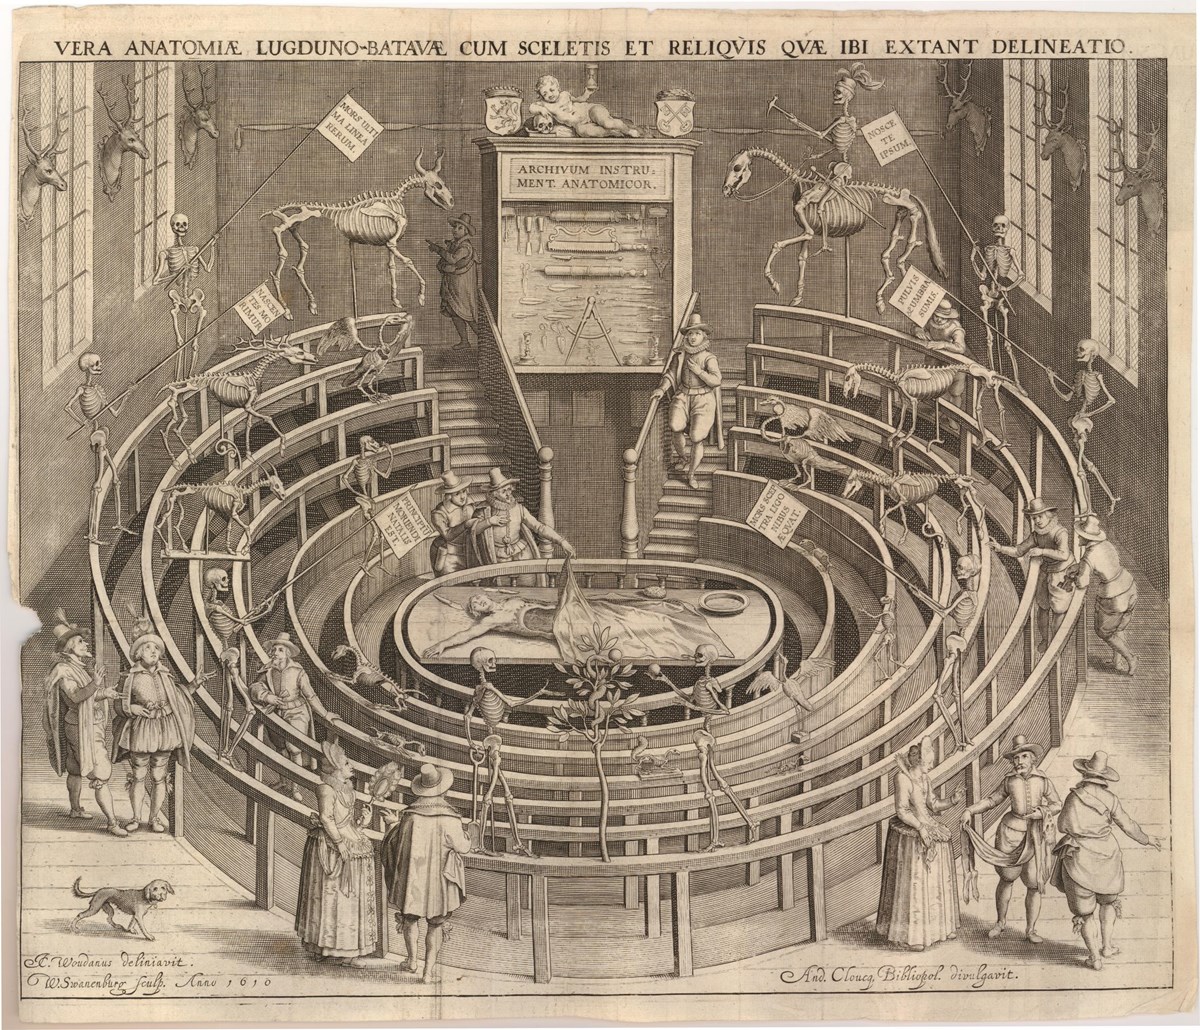 Etching of the anatomy theatre at the University of Leiden by Willem van Swanenburg after Jan Cornelisz, 1610. Credit: on loan from the Royal College of Physicians, all rights reserved